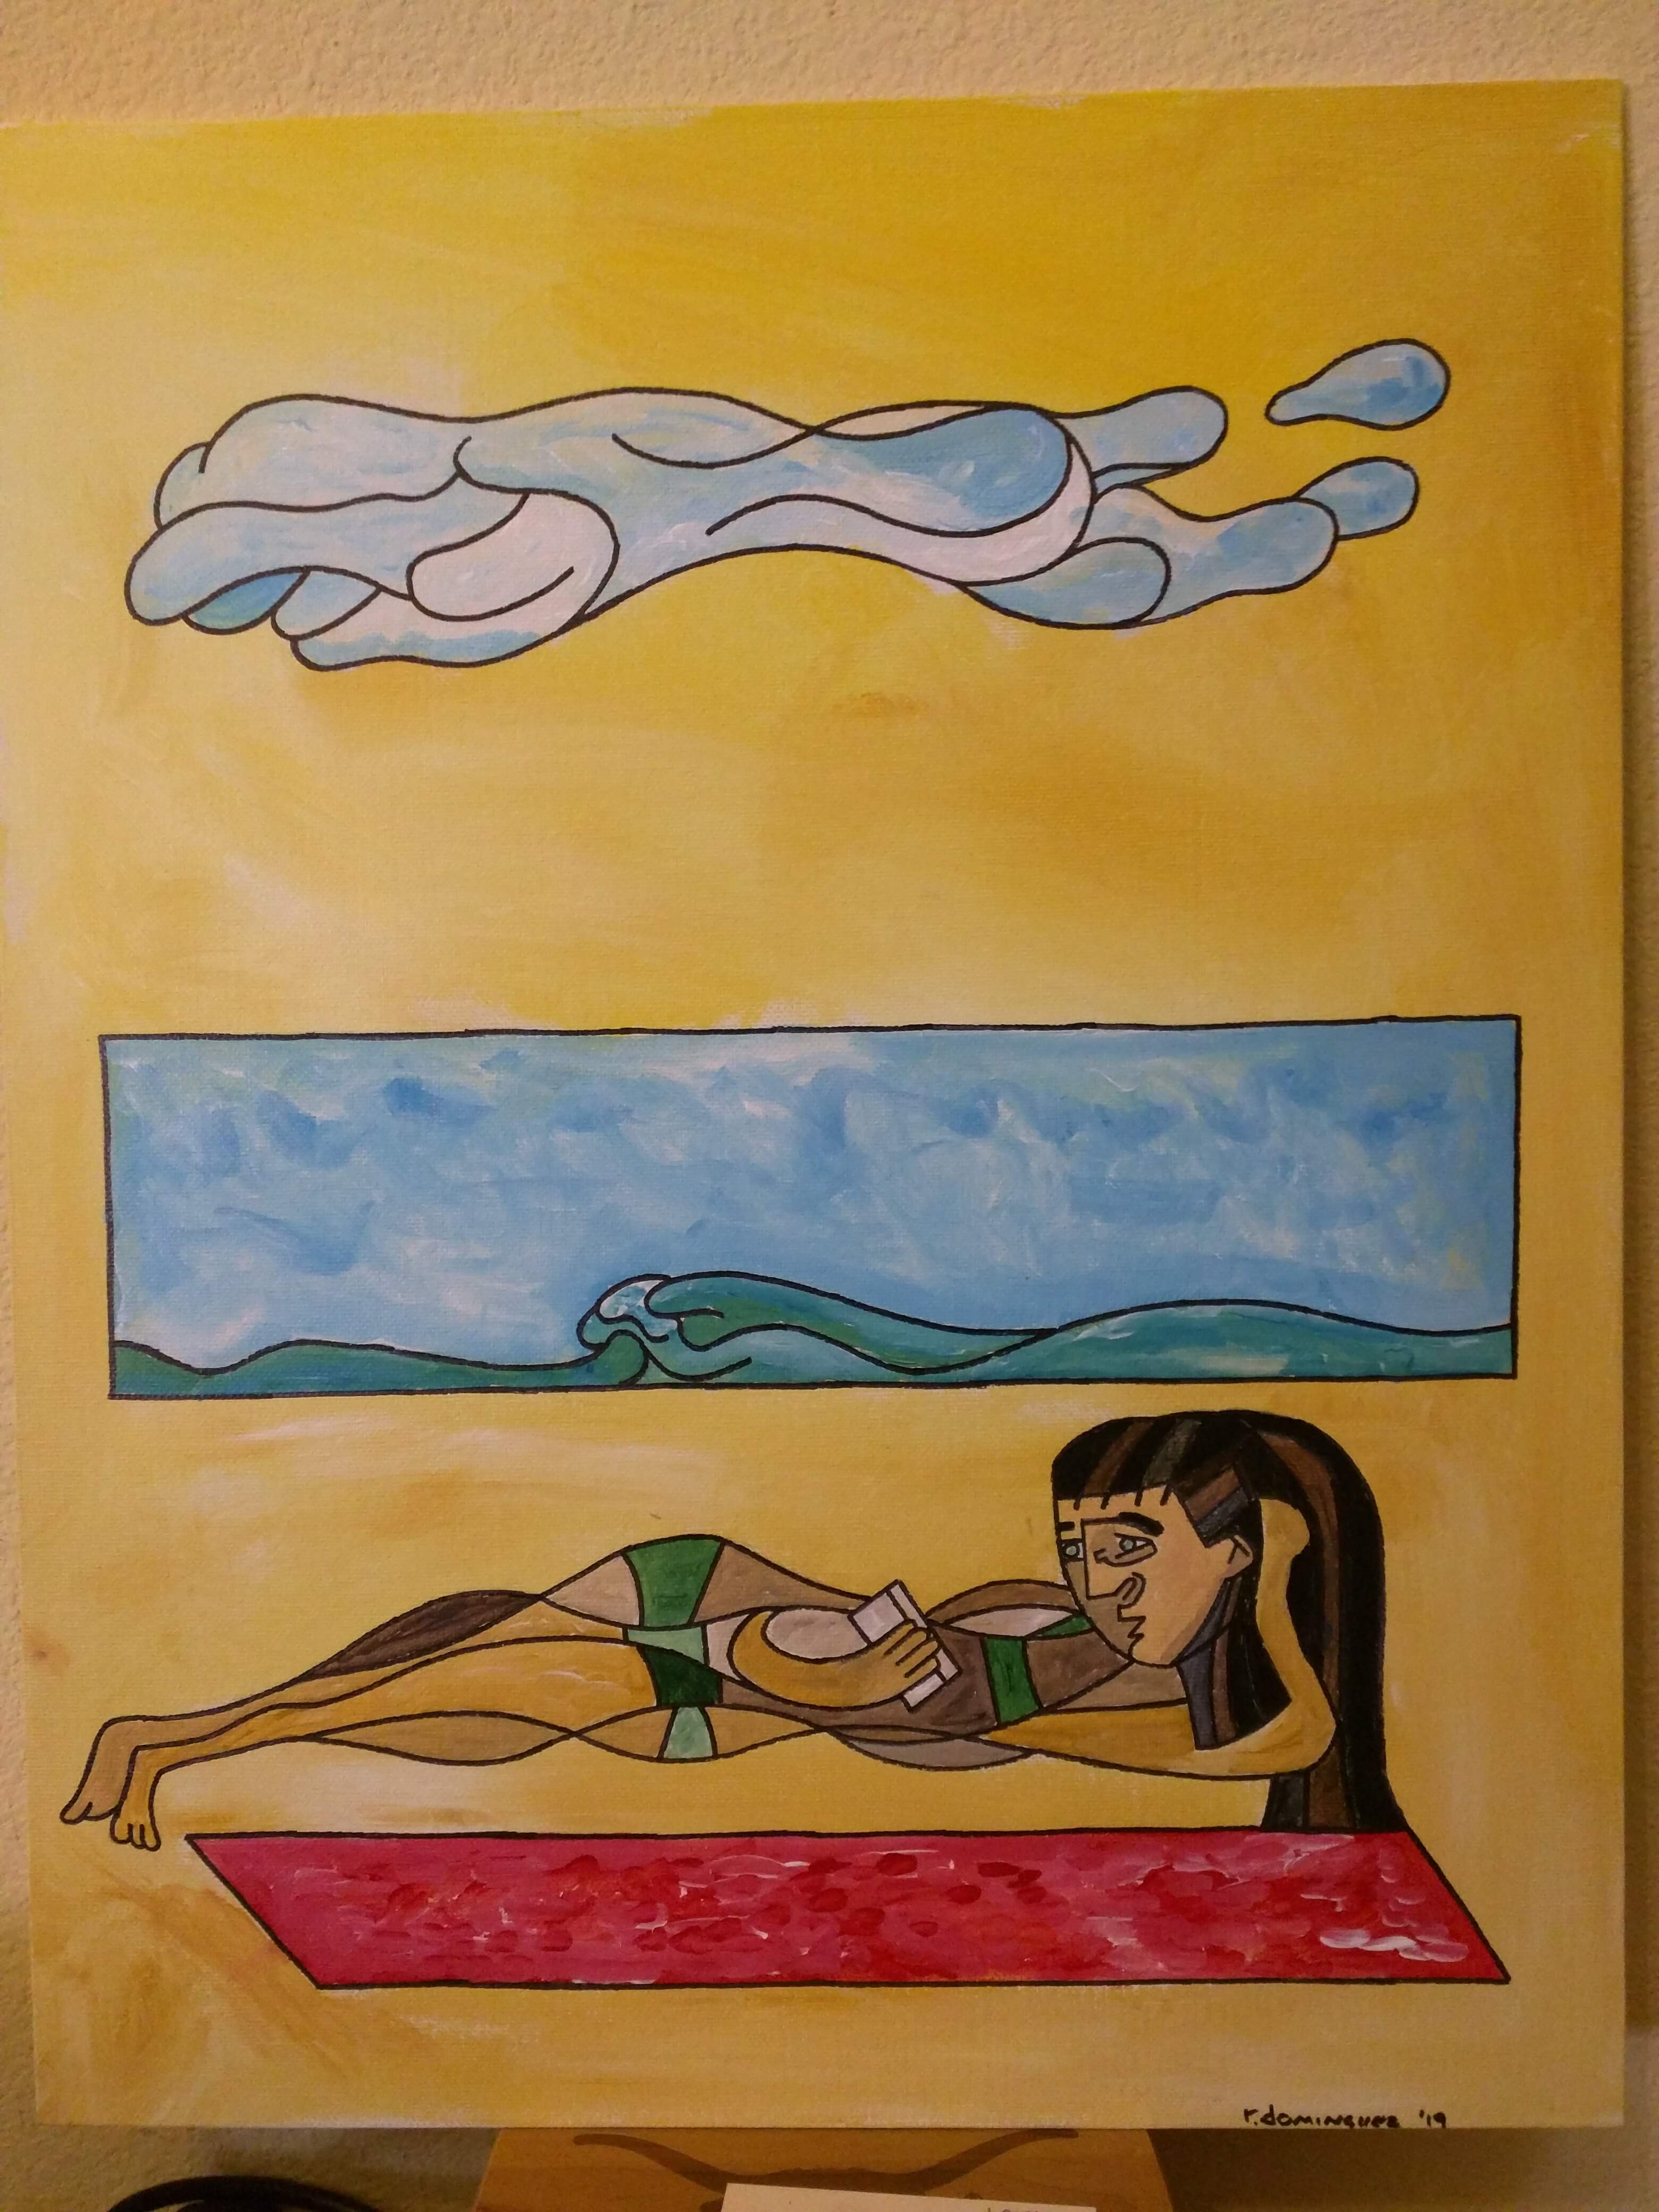 Painting of a sunbather at the beach.